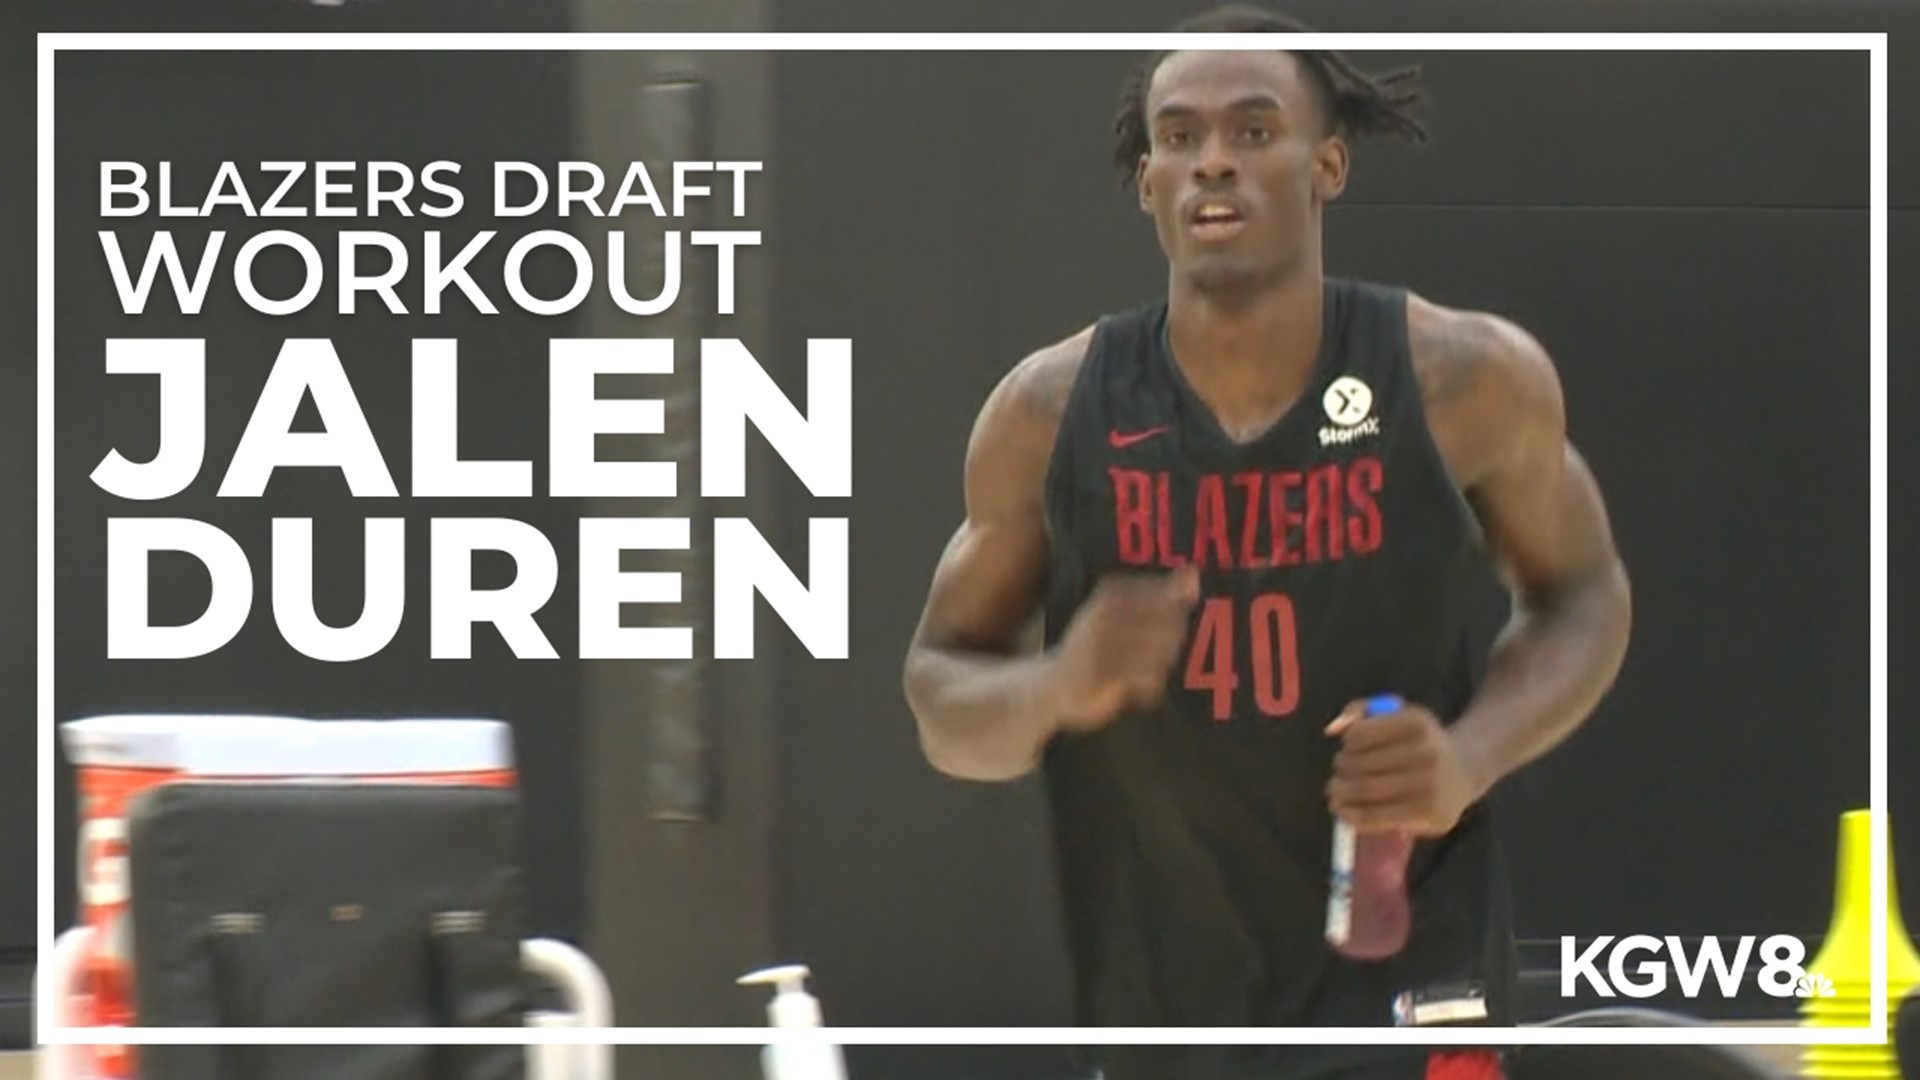 Memphis center Jalen Duren talks to the Portland media after a draft workout at the Trail Blazers practice facility. Duren is a projected Top 10 pick.